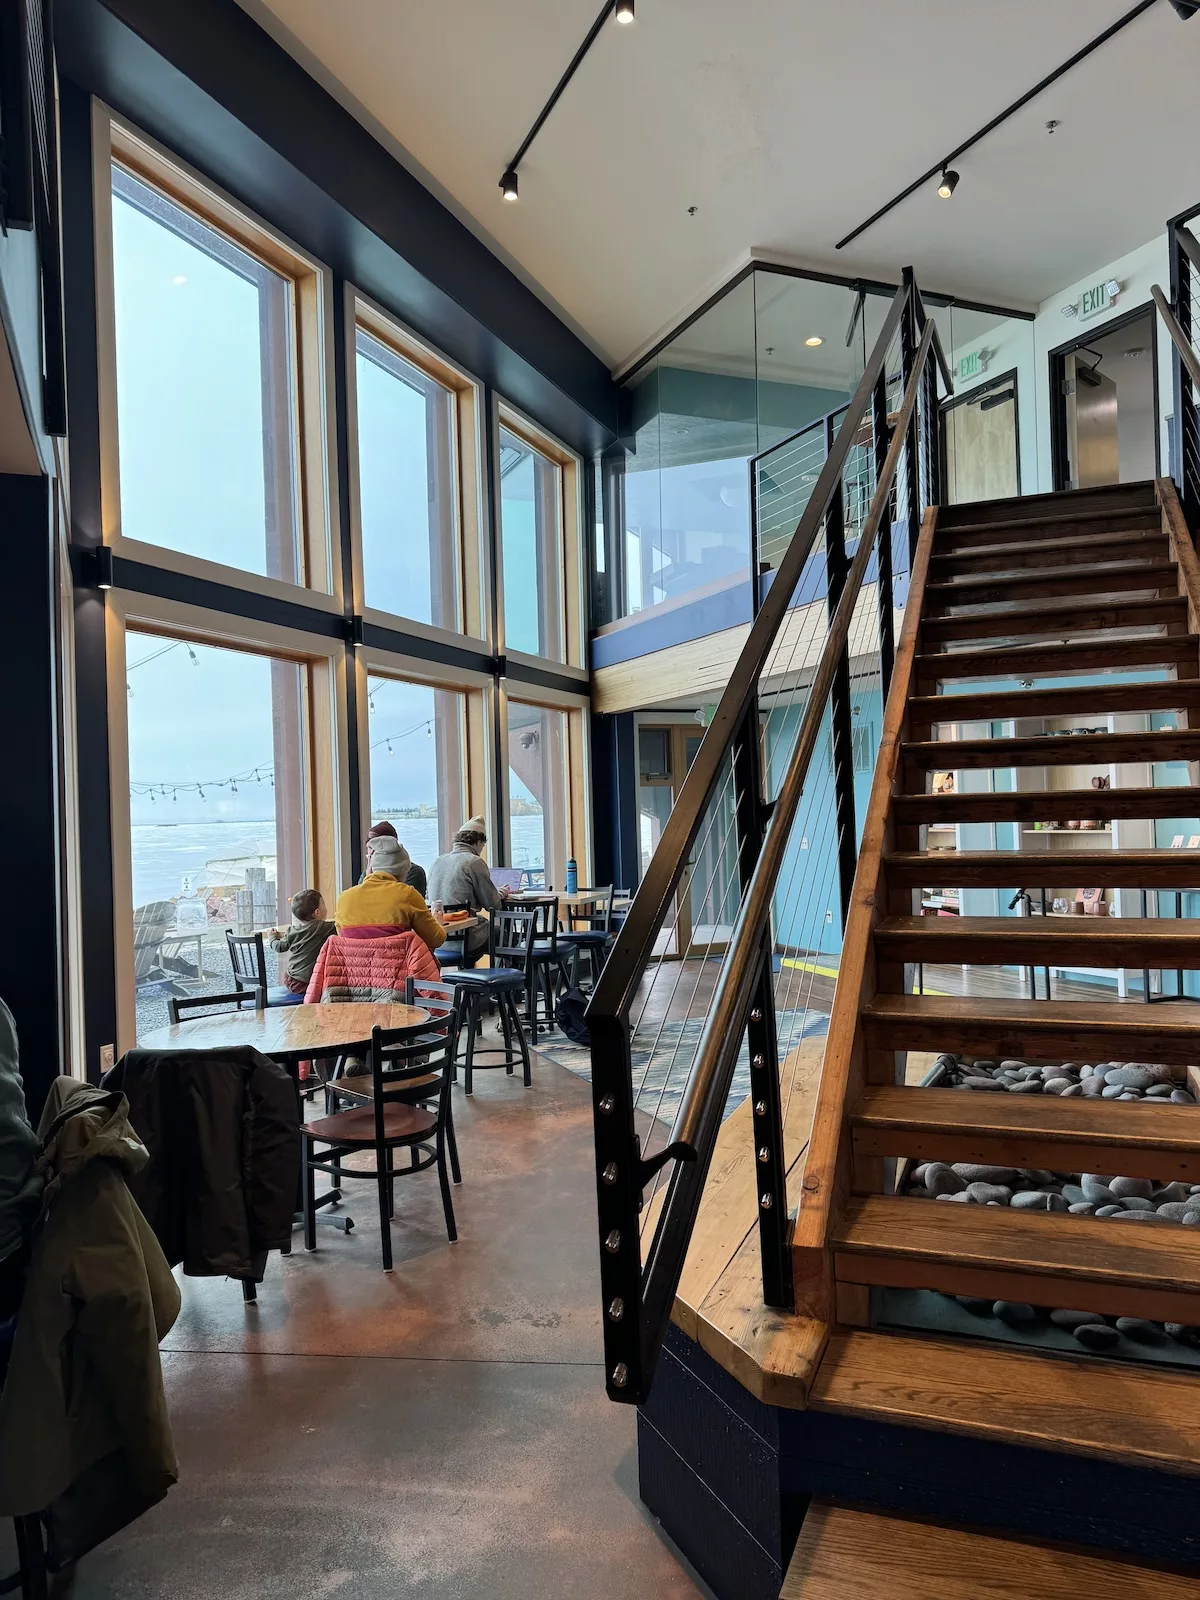 Image of stairwell and seating area at the Sandbar in Ashland, WI
